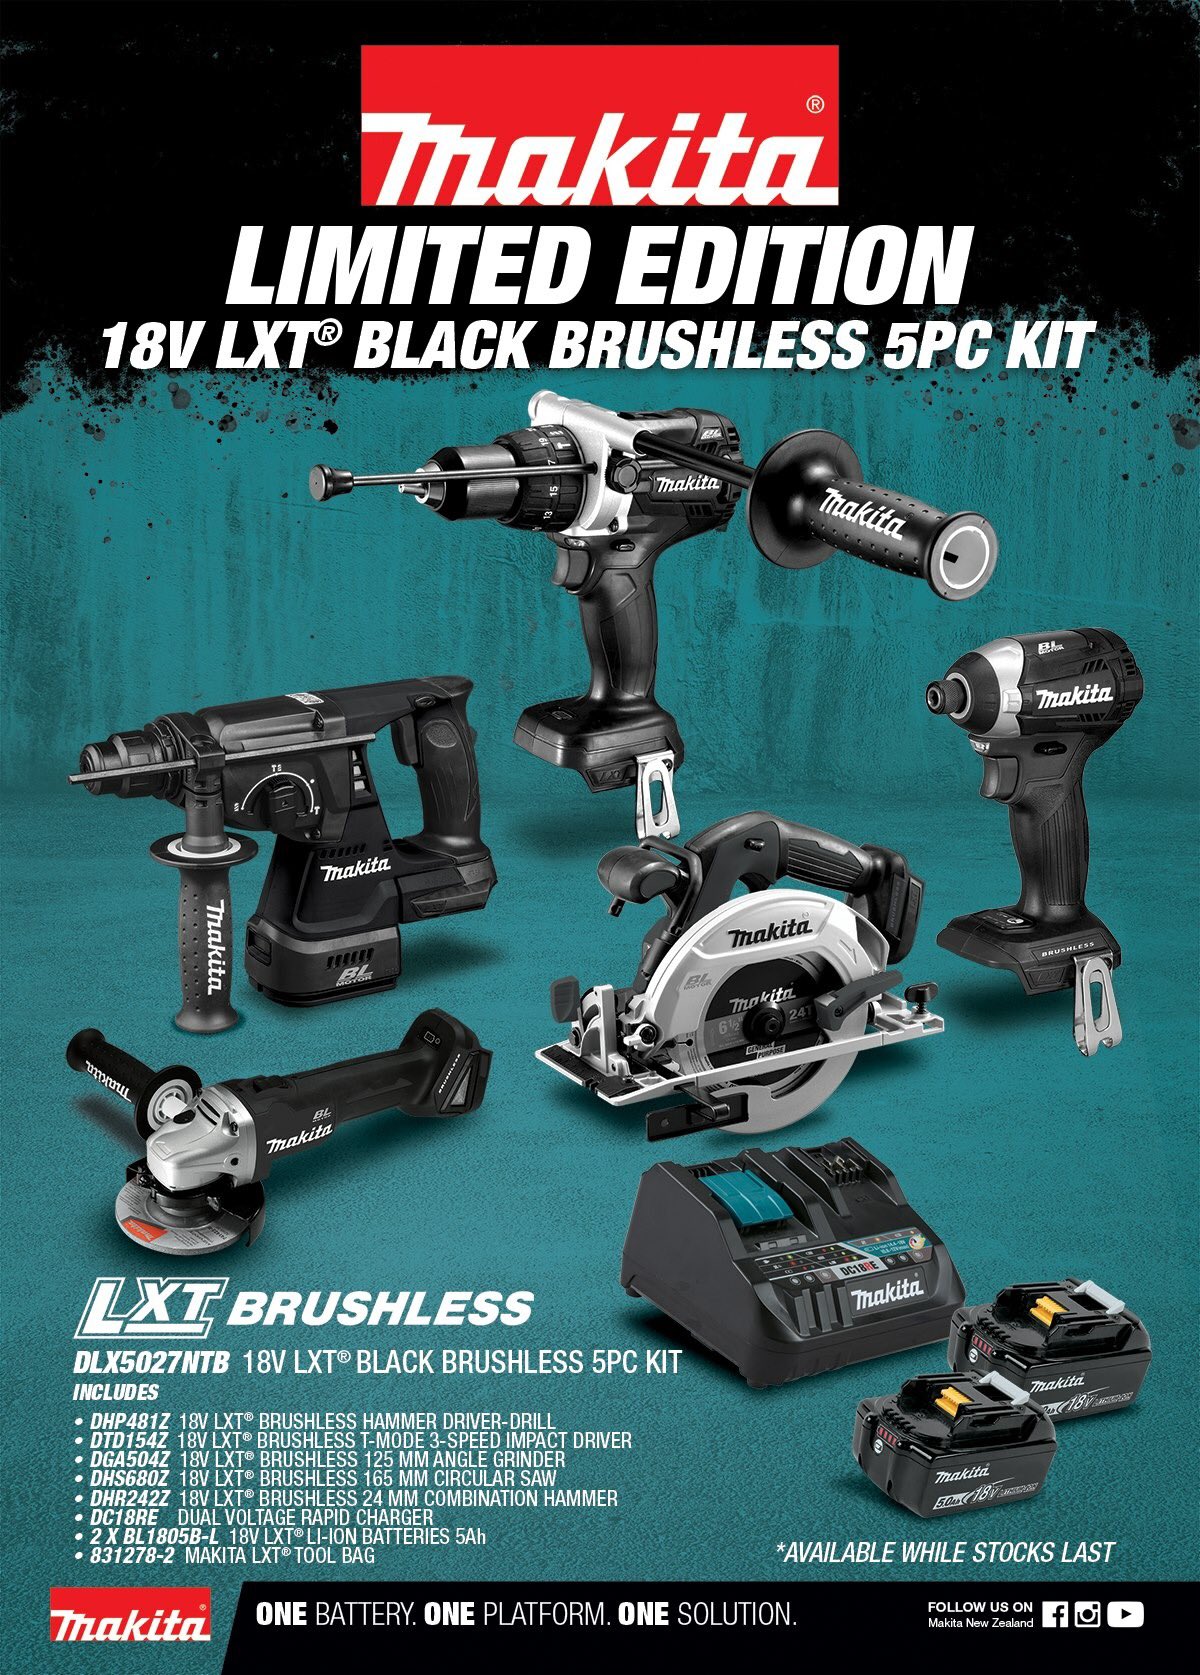 Makita New Zealand on Twitter: "Get exclusive, limited edition 5 piece 18V LXT Black Brushless Kit whilst stocks last! Find your nearest stockist on the Makita website - https://t.co/N4rEo3KDMz https://t.co/O72TB7FNEr" /